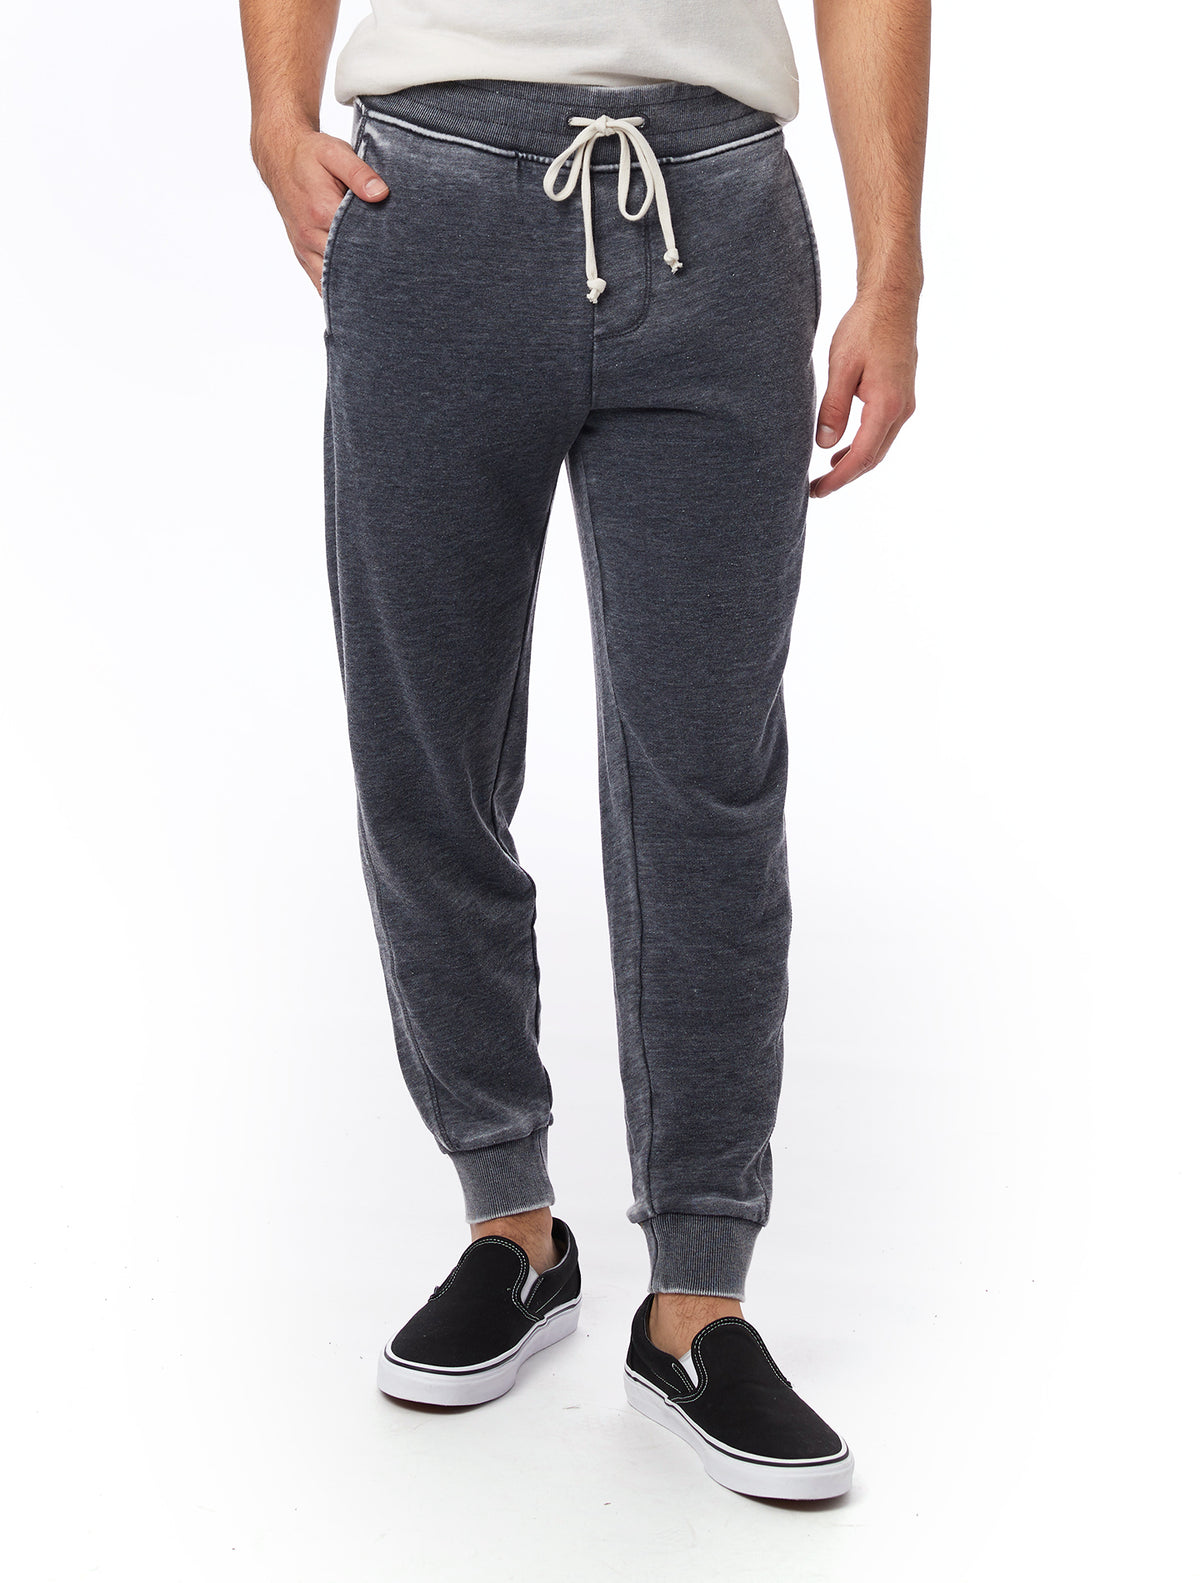 Sauvage French Terry Sweat Pants White 572WHT - Free Shipping at LASC